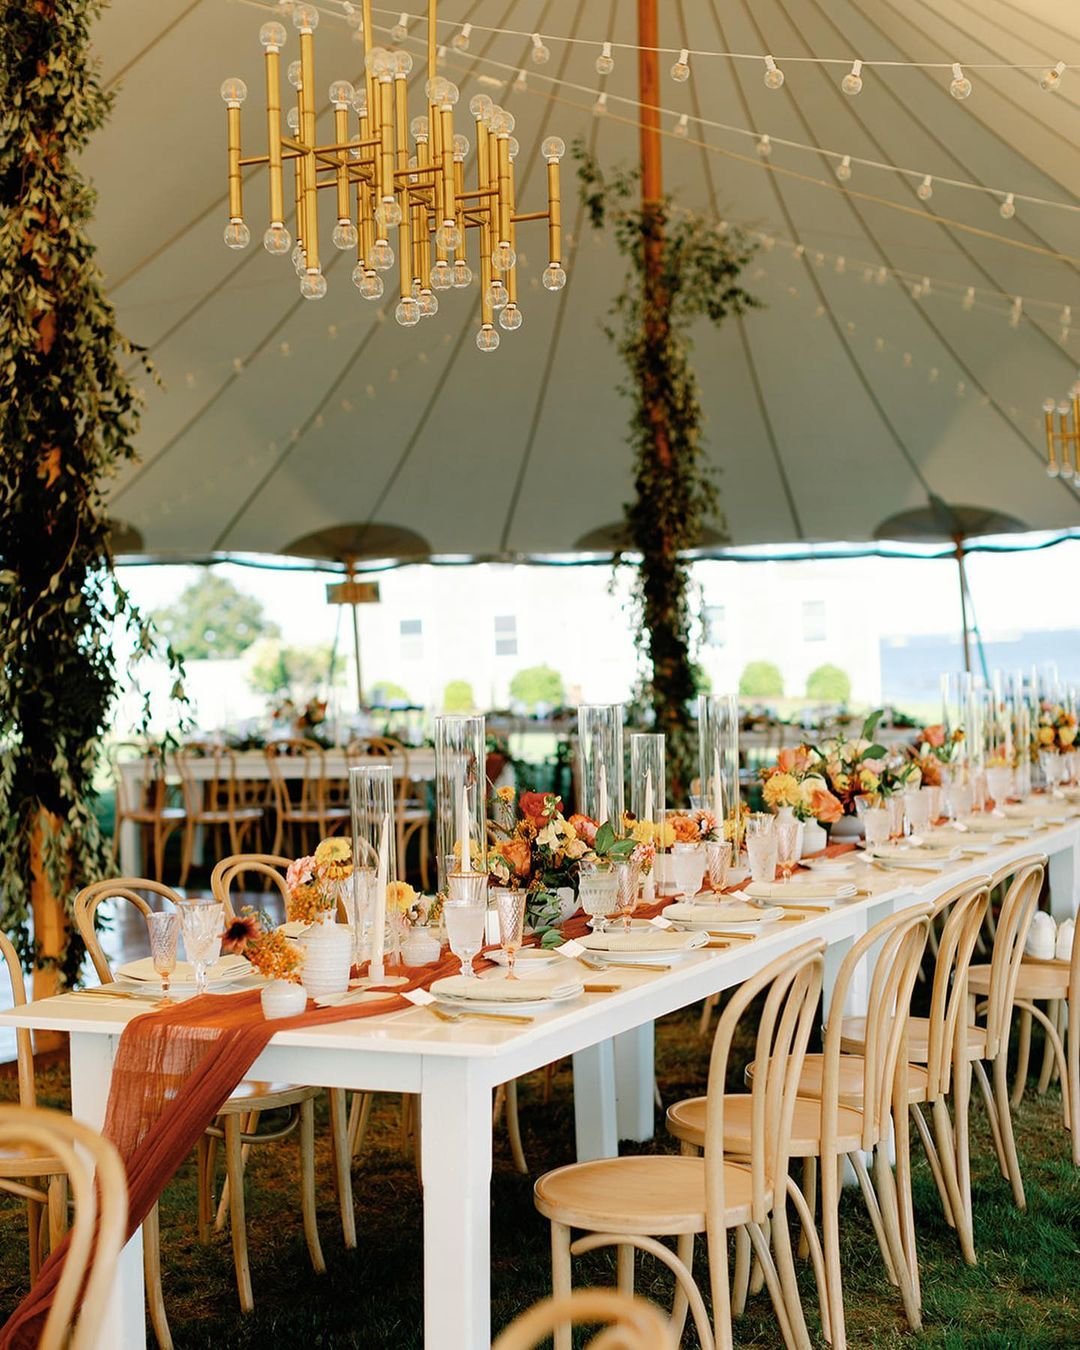 Delving into the exquisite decor details under @sperrytents, where floral arrangements bloom with a vibrant summer color palette, adorning table setups that enchant the senses. Let this artistic display inspire your next event or wedding with its cap